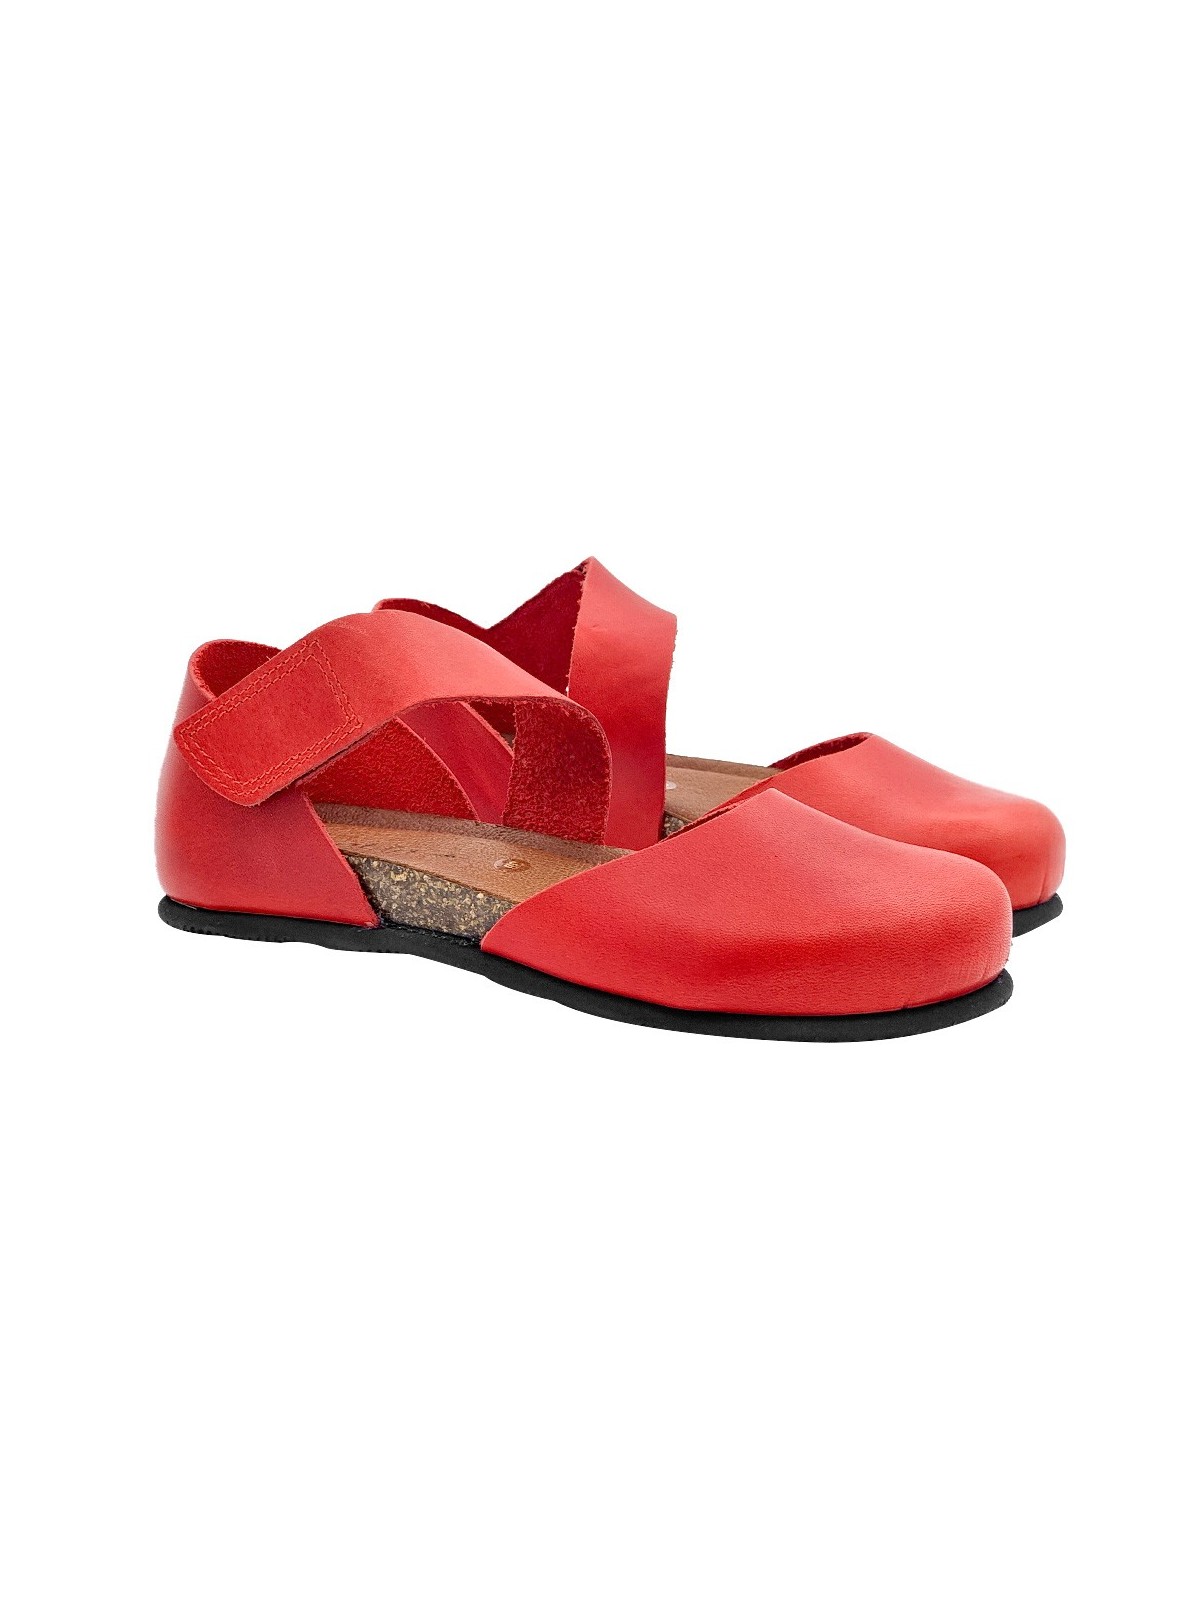 RED LOW SABOTS IN LEATHER WITH STRAP CLOSURE